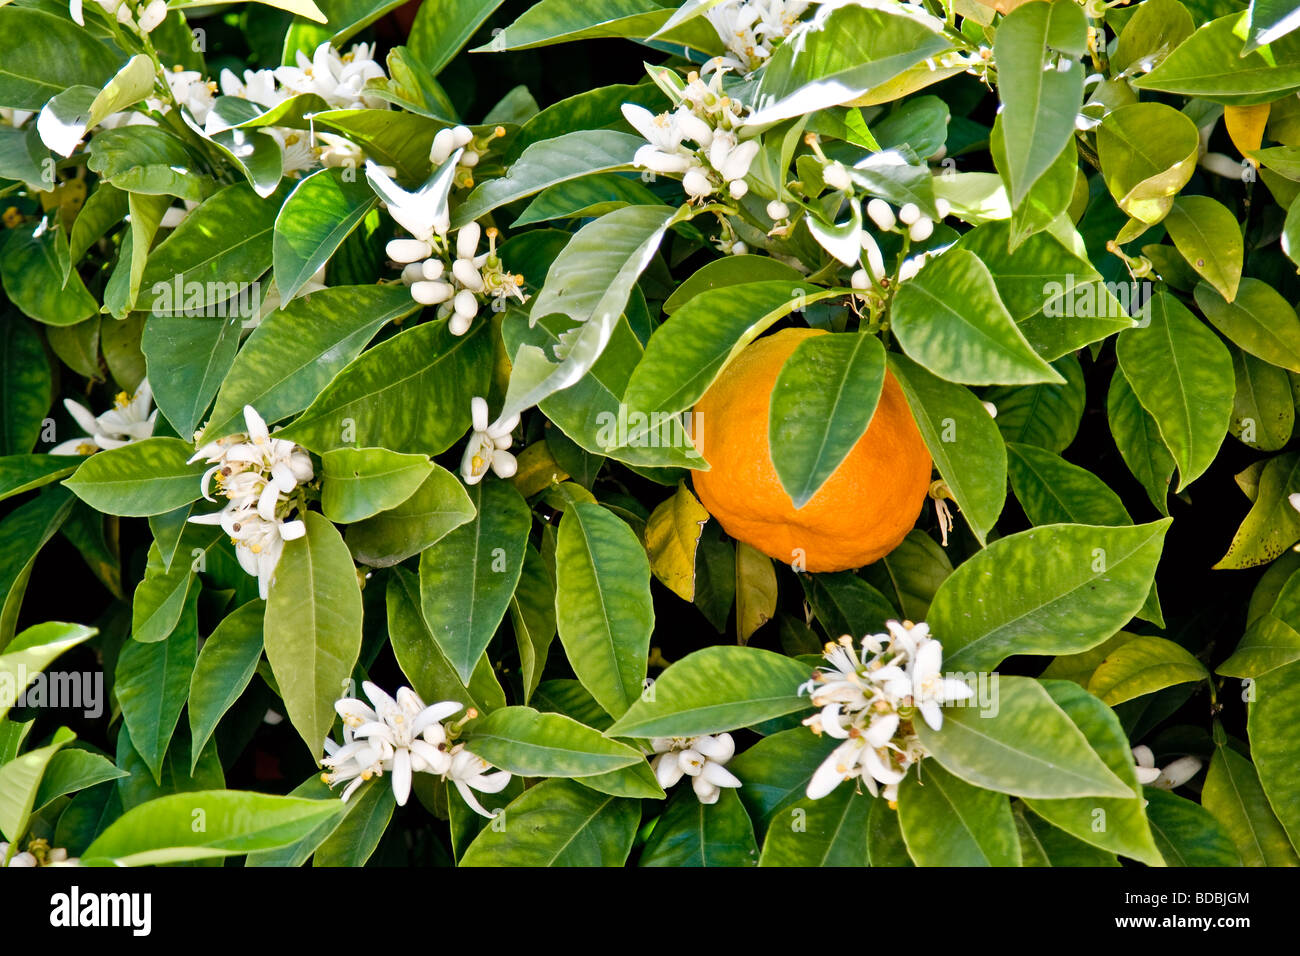 Oranges growing in Seville Stock Photo